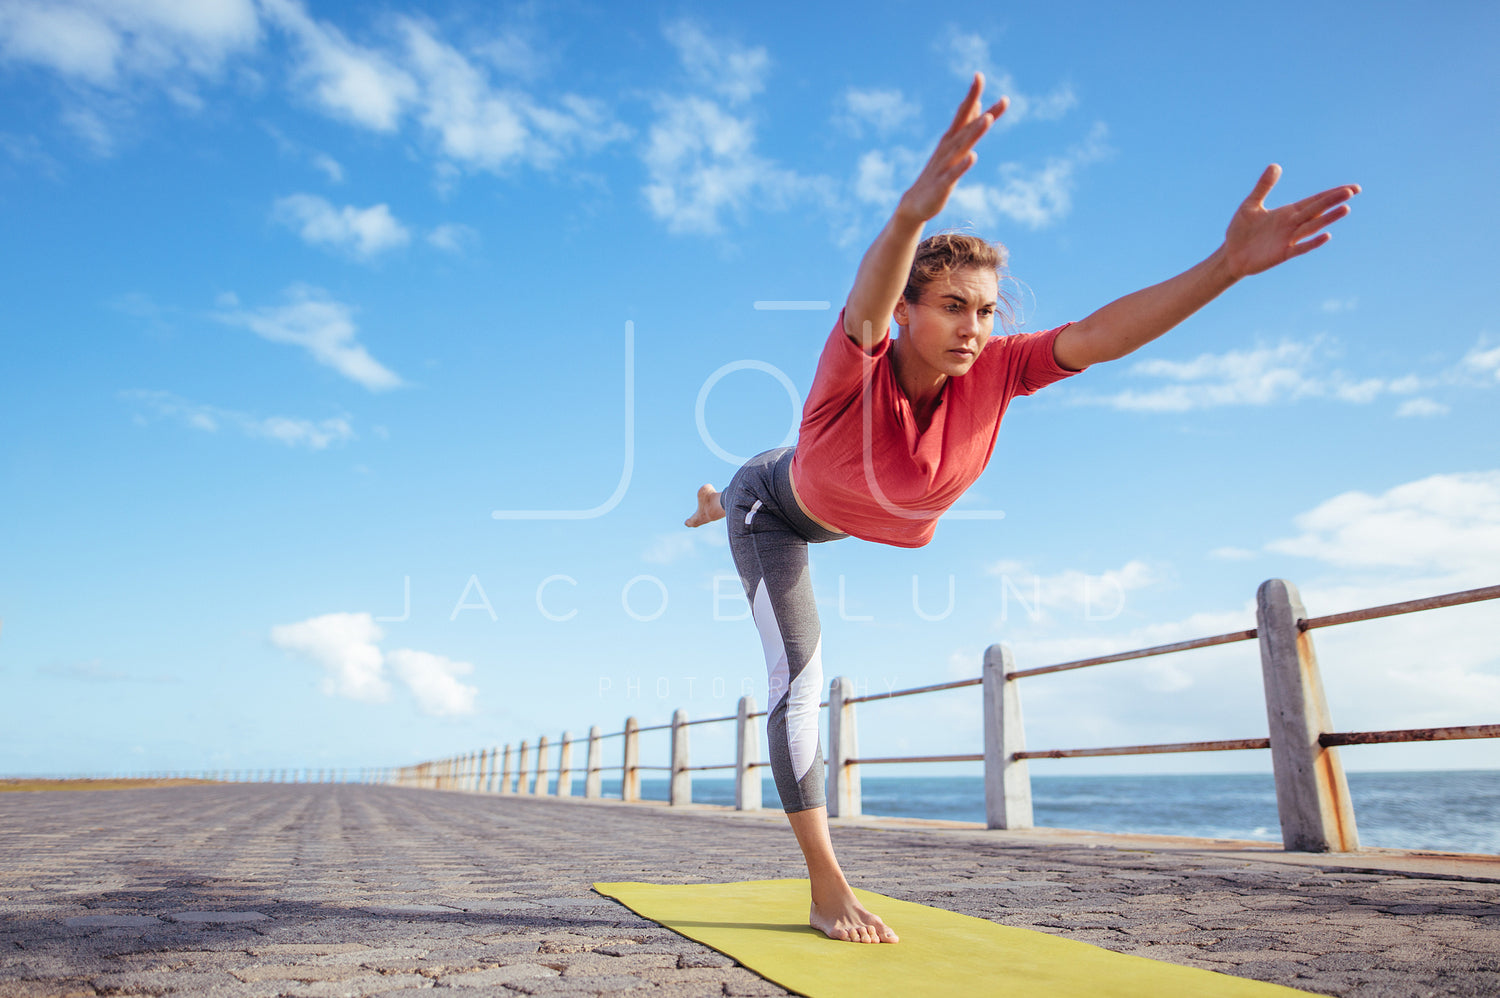 AURA YOGA STUDIO - Virabhadrasana, also known as Warrior Pose, is a  foundational yoga pose symbolizing strength and focus. It cultivates  balance, stamina, and concentration, promoting a sense of grounded  empowerment in